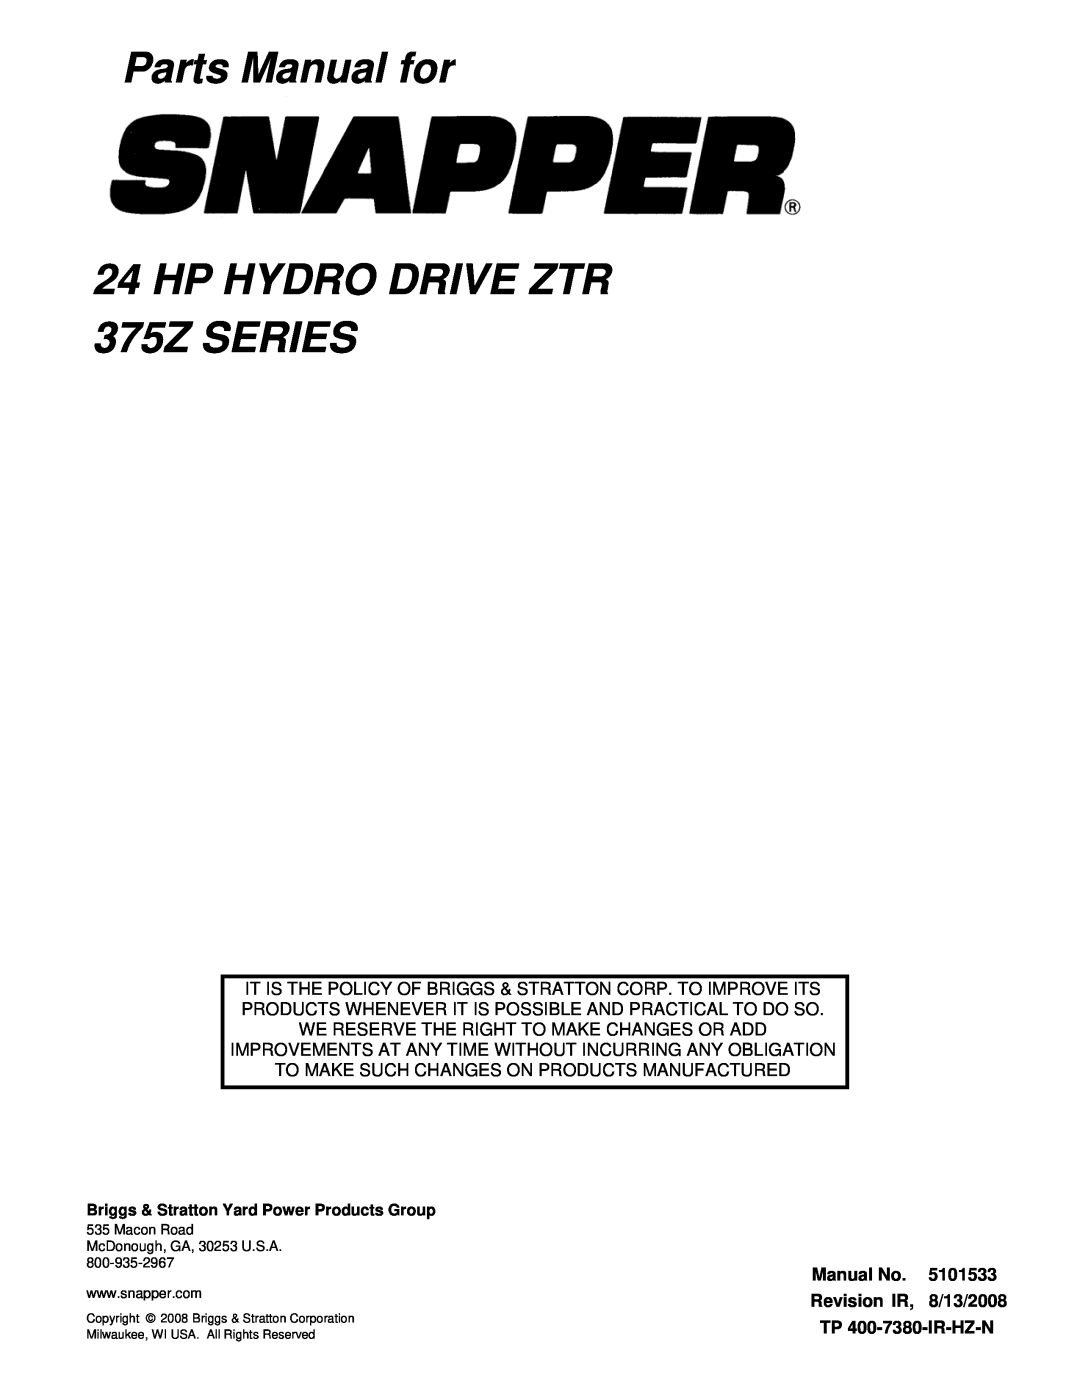 Snapper 375ZB2050CE manual Parts Manual for 24 HP HYDRO DRIVE ZTR, 375Z SERIES, Manual No, 5101533, Revision IR, 8/13/2008 